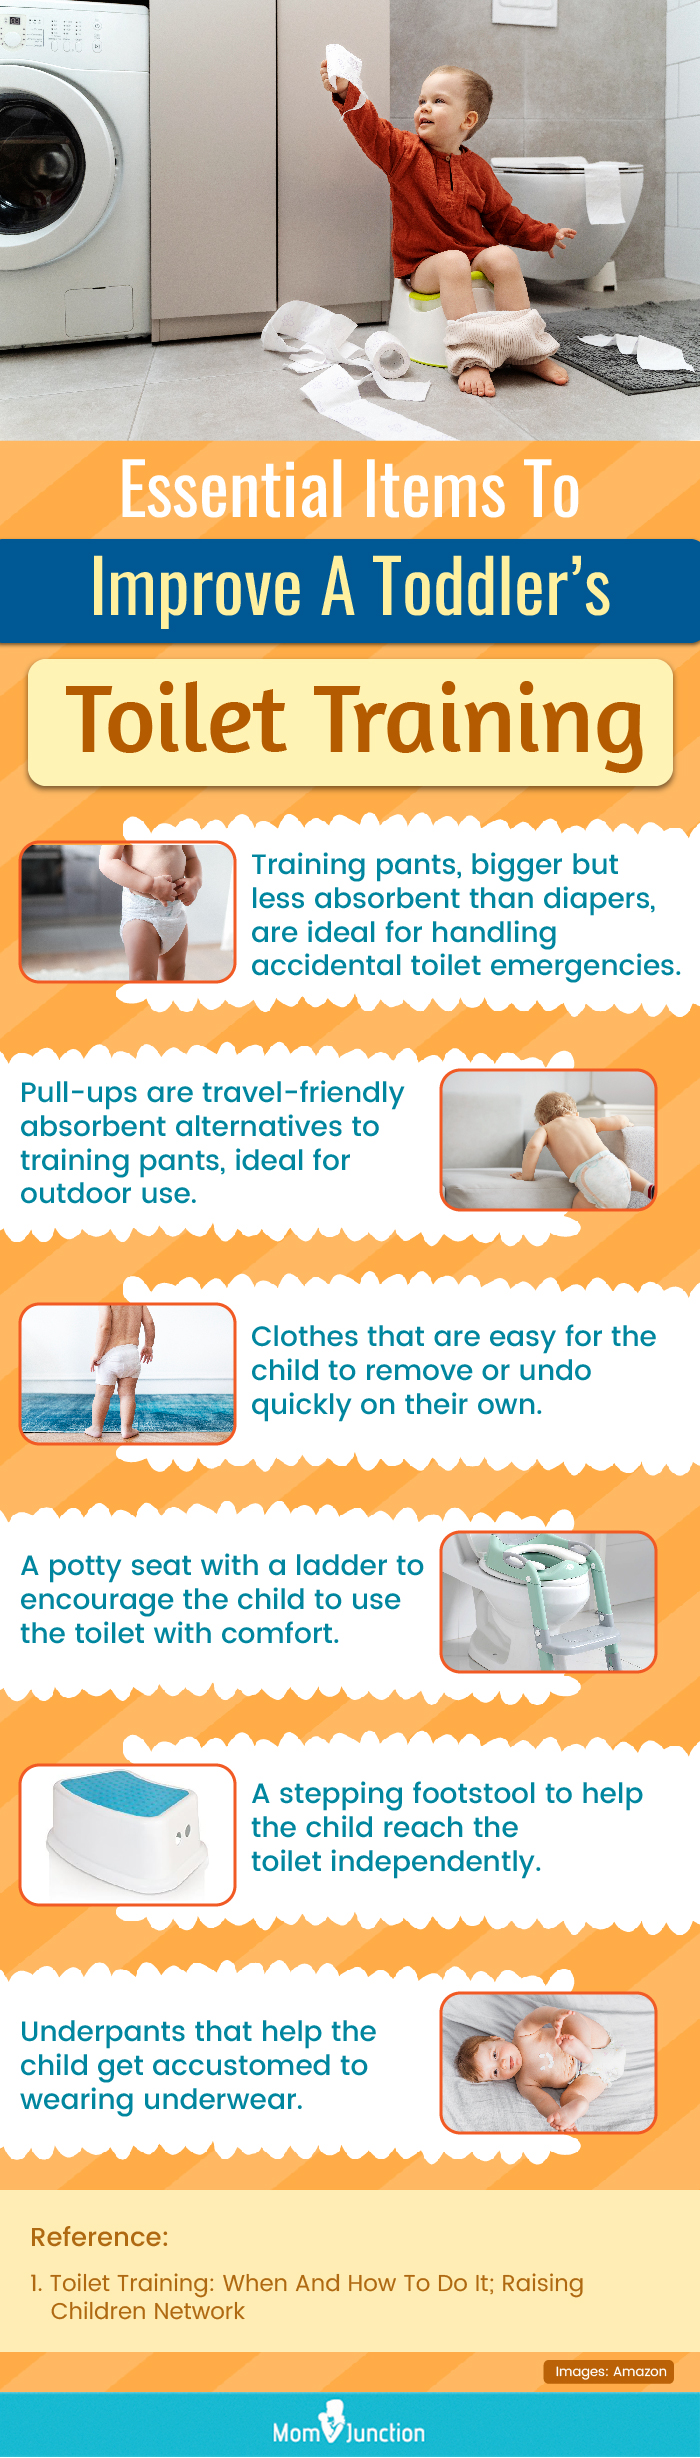 Essential Items To Improve A Toddler’s Toilet Training (infographic)